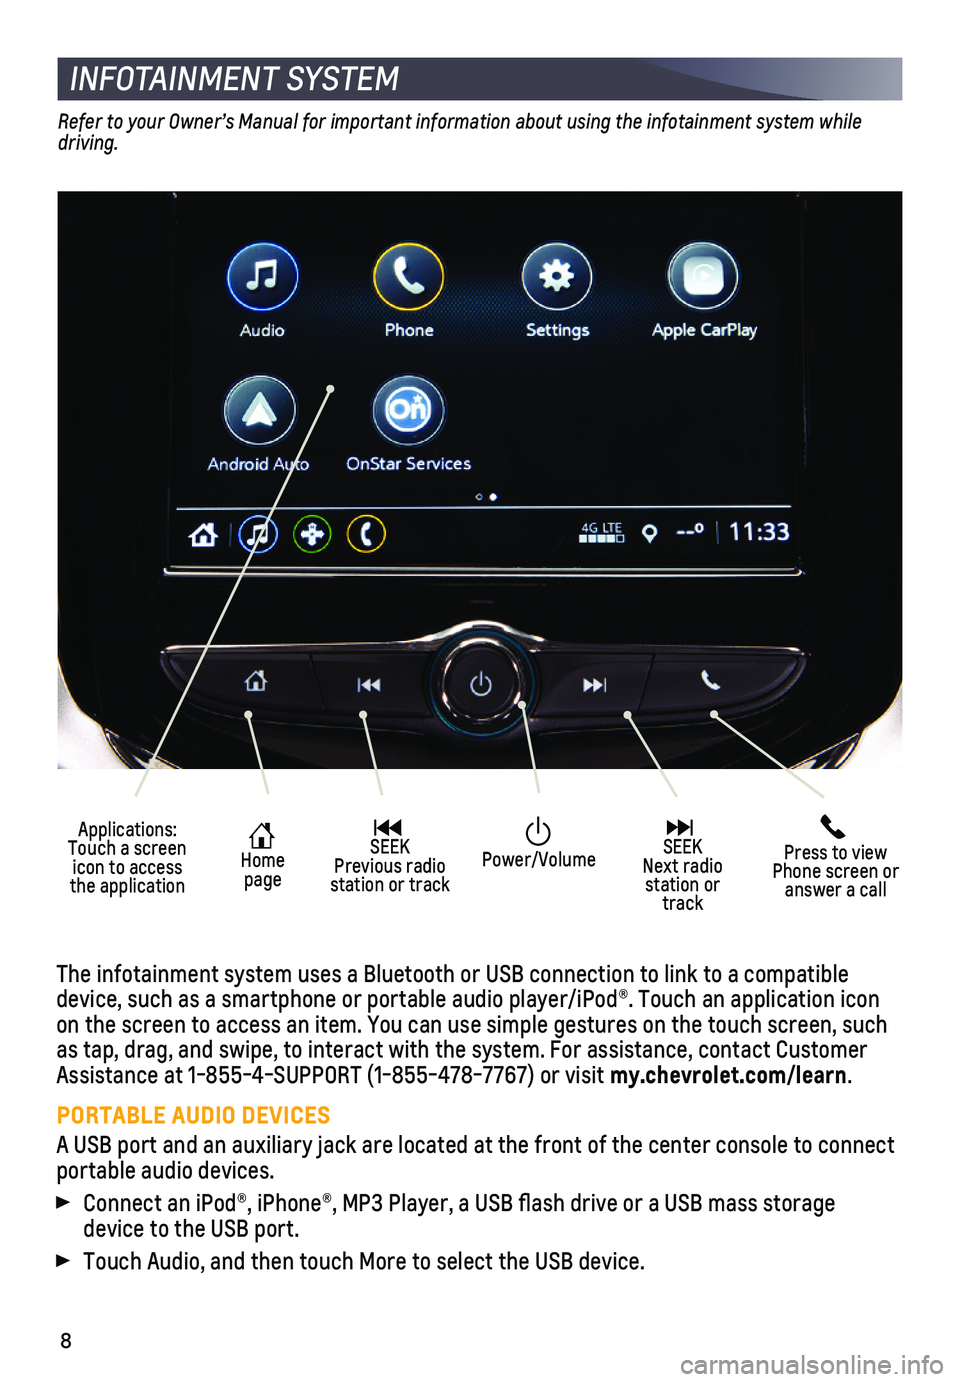 CHEVROLET SONIC 2020  Get To Know Guide 8
INFOTAINMENT SYSTEM
Refer to your Owner’s Manual for important information about using the infotainment system while driving.
The infotainment system uses a Bluetooth or USB connection to link to 